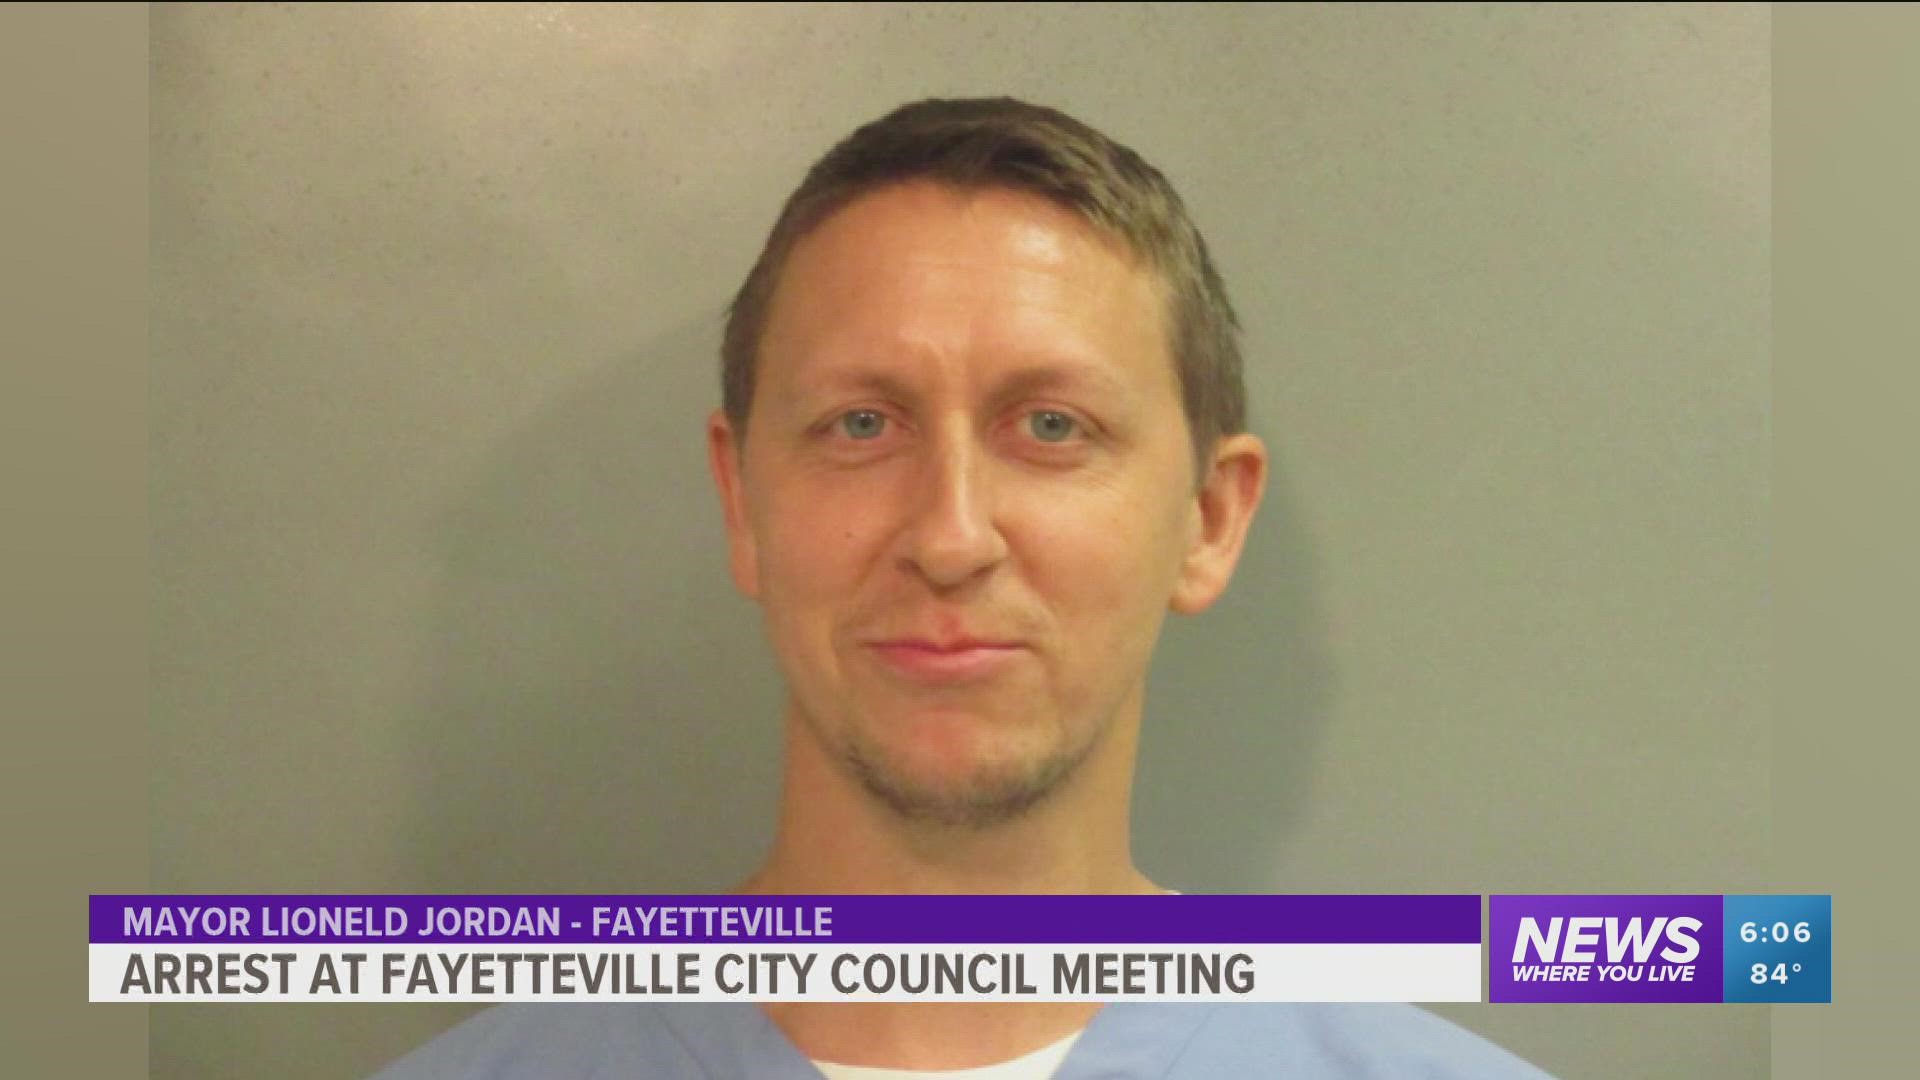 James Smith was cited for trespassing at the Fayetteville City Council meeting Tuesday after he refused to put on a face mask.